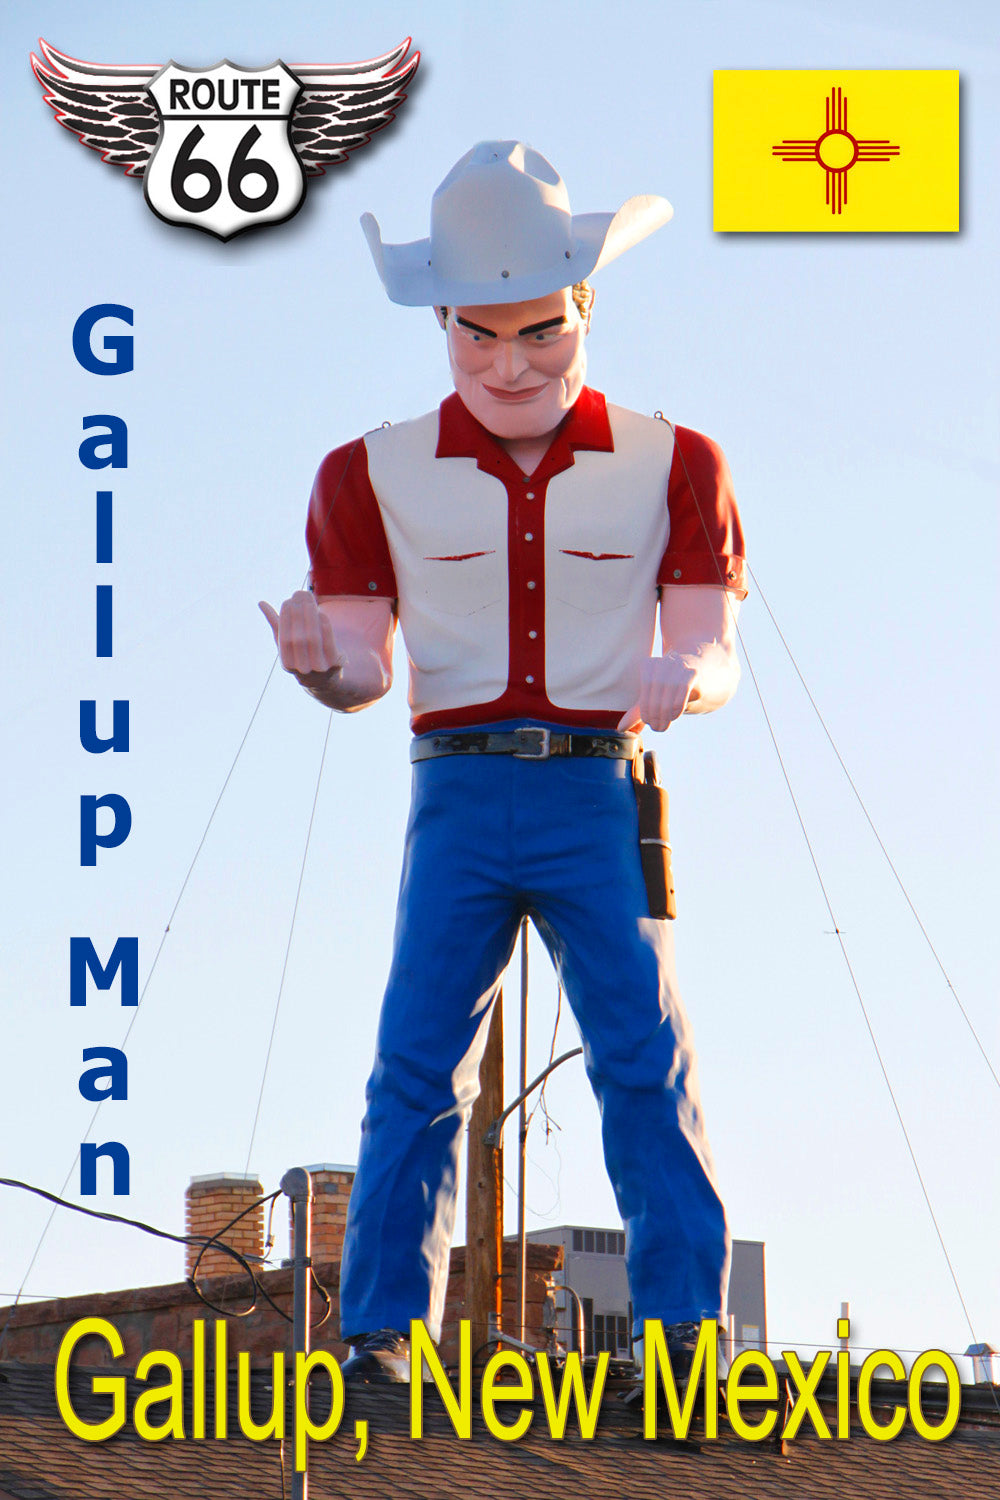 Muffler Man, Gallup NM, Route 66 Collectible, Route 66 Magnet, Gallup Man, Muffler Man Magnet